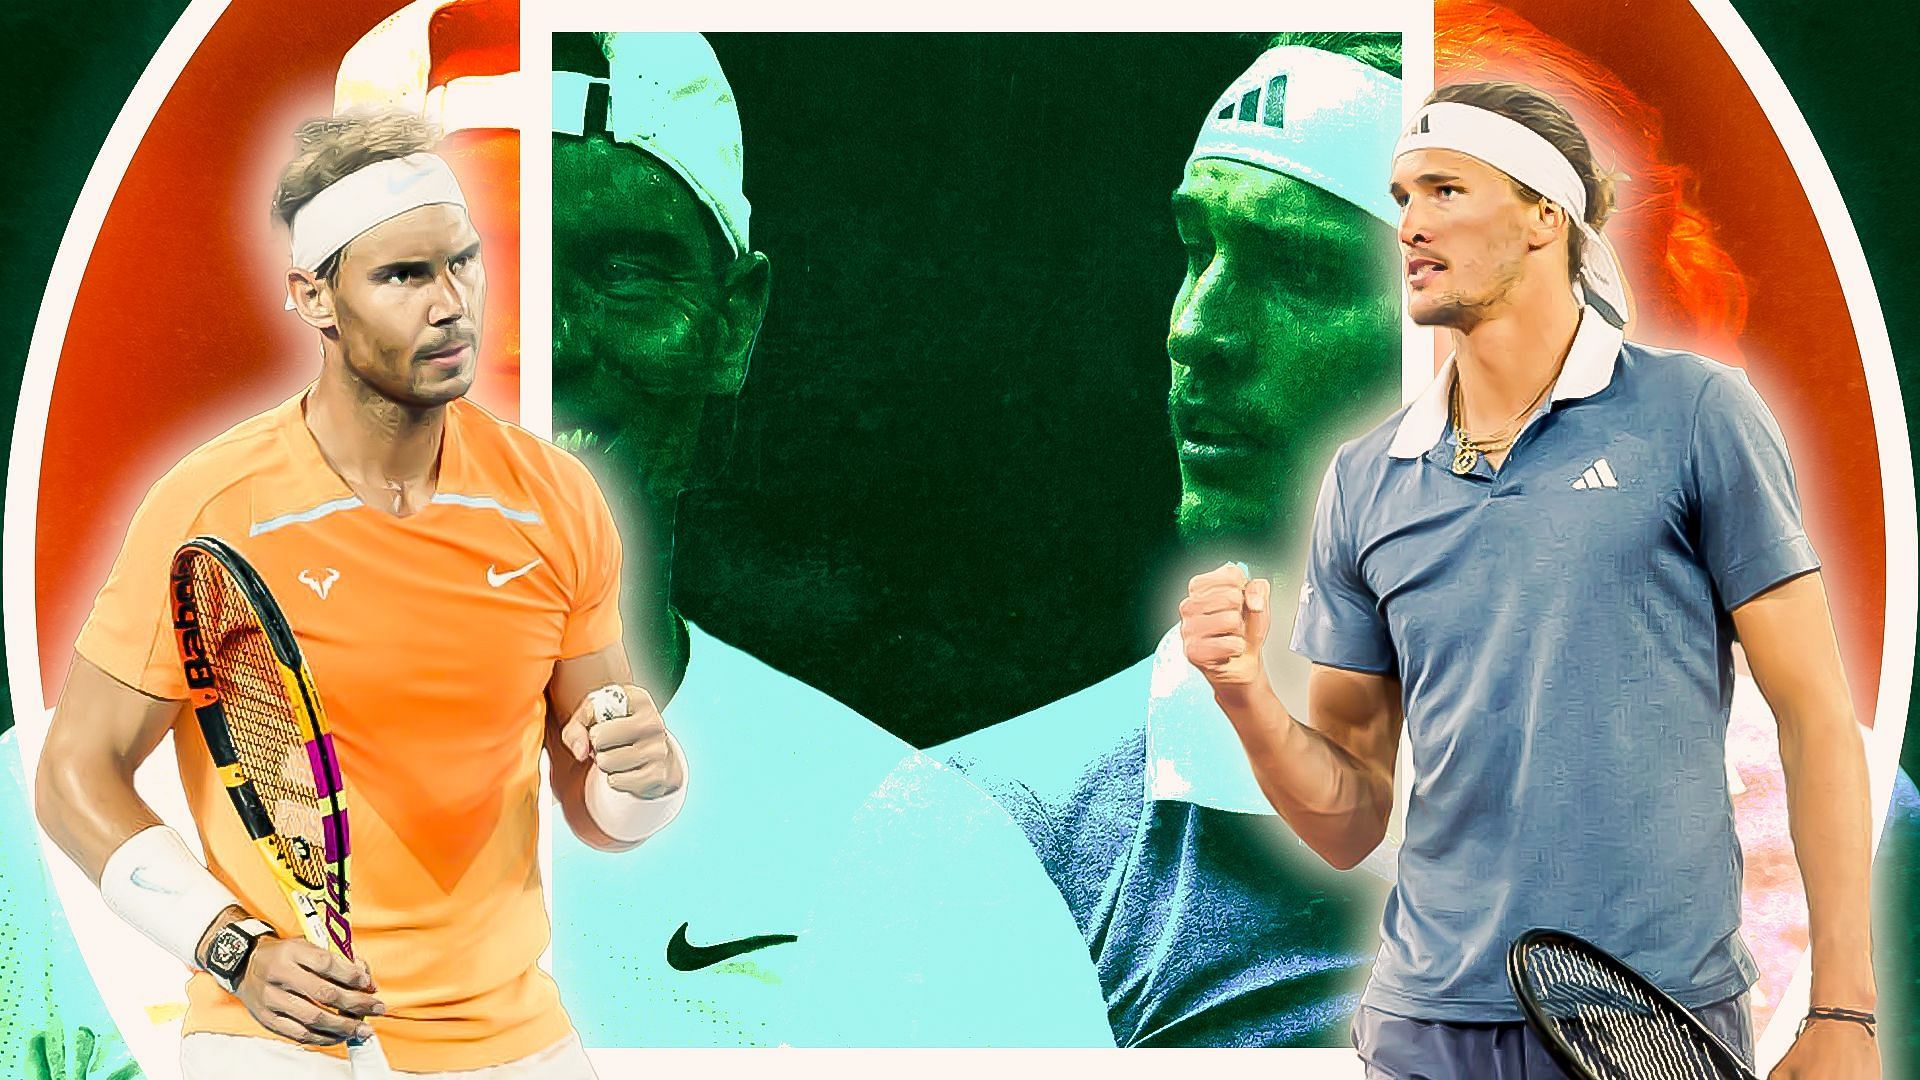 3 most unexpected French Open 1R clashes in tennis history ft. Rafael Nadal-Alexander Zverev